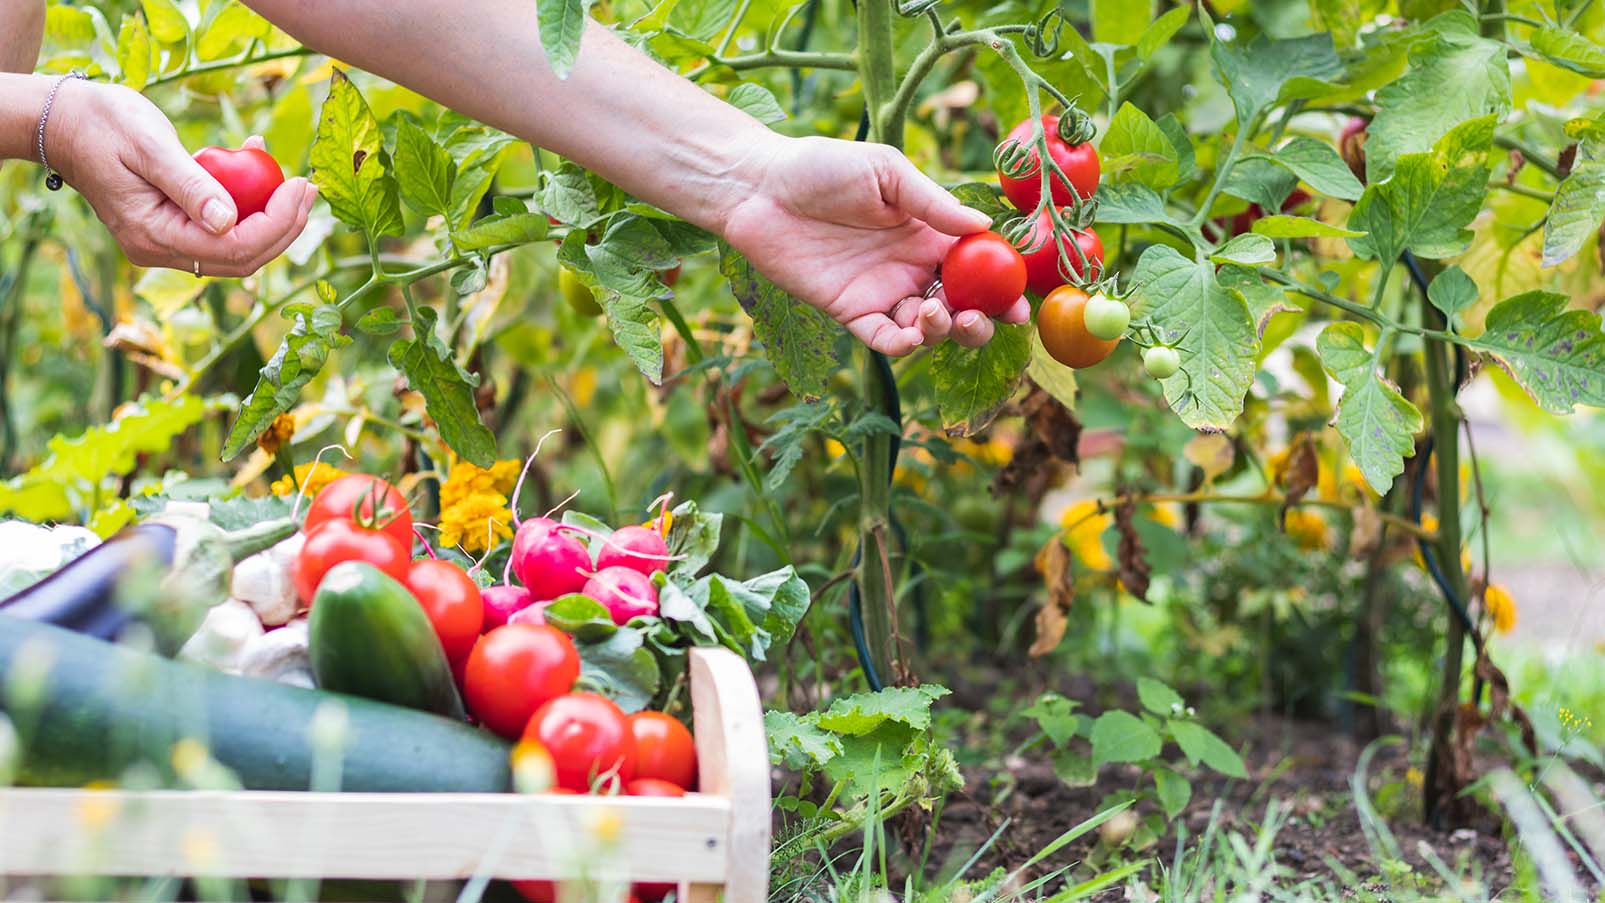 How to Start a Vegetable Garden as a Beginner, According to Experts?